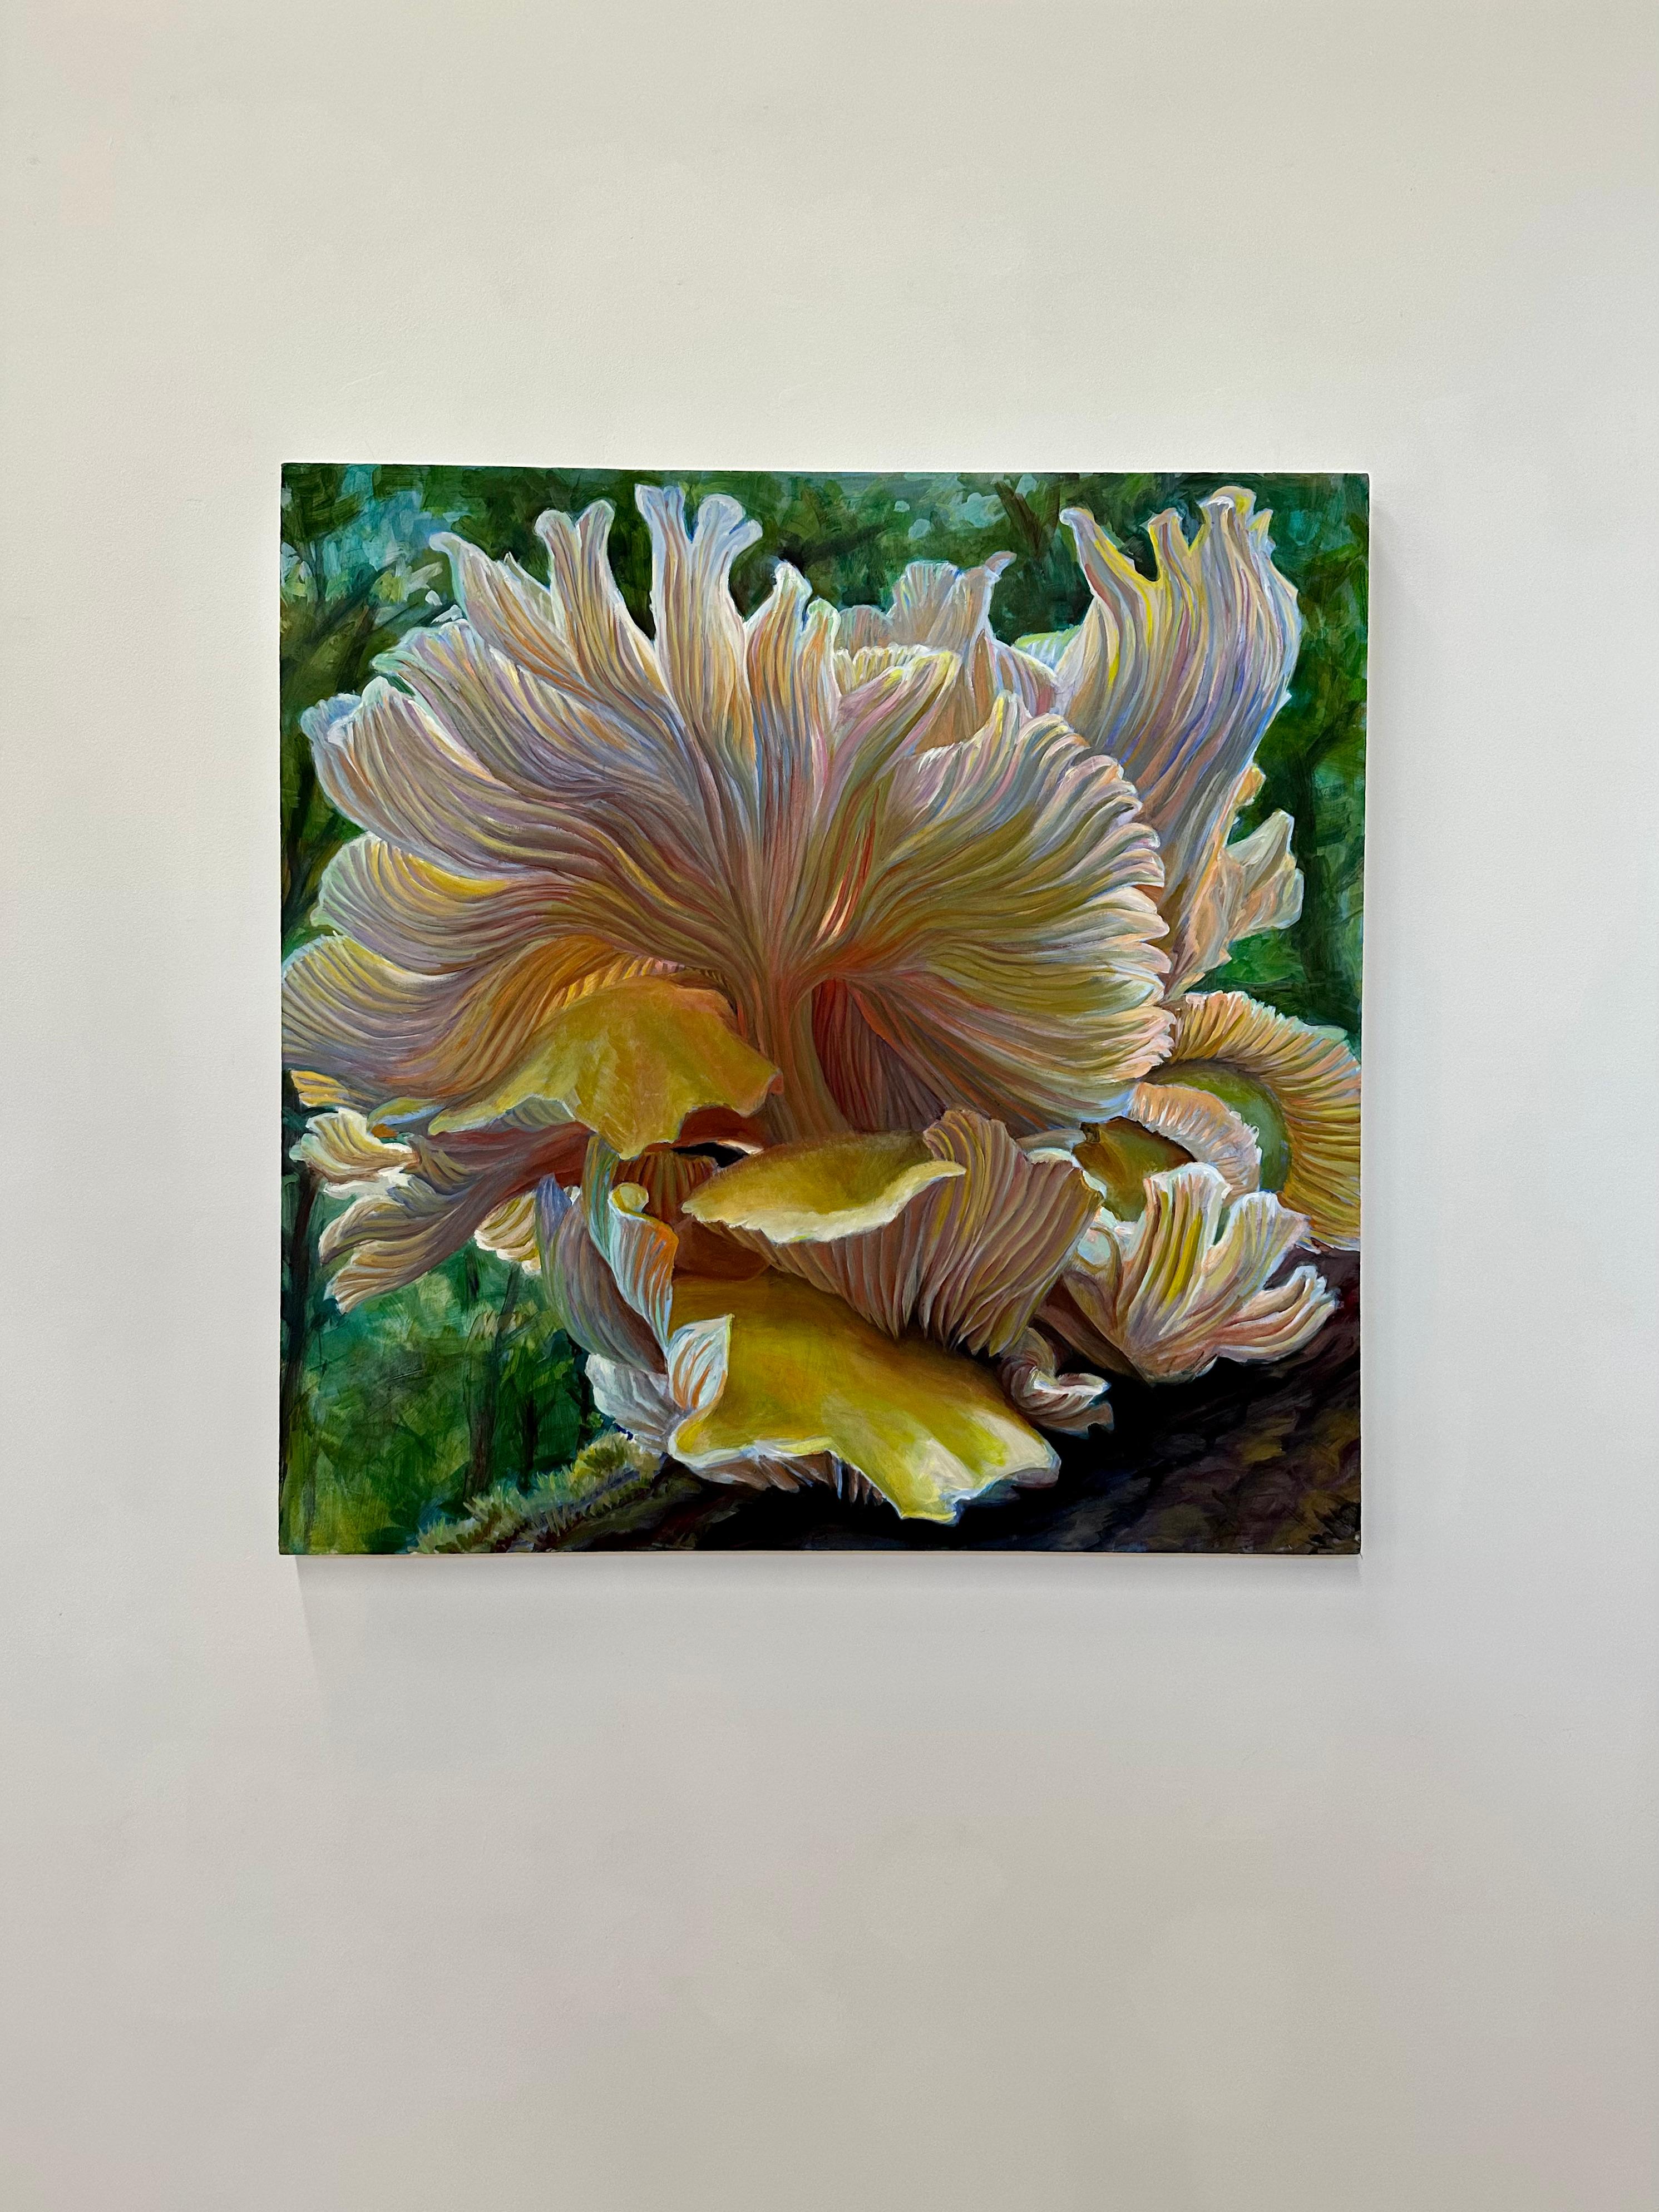 A golden oyster mushroom in hues of yellow, ochre, peach and orange is masterfully painted, arranged in a dynamic, asymmetrical composition, luminous against an emerald green background. Signed, dated and titled on verso.

Andrea Kantrowitz invites